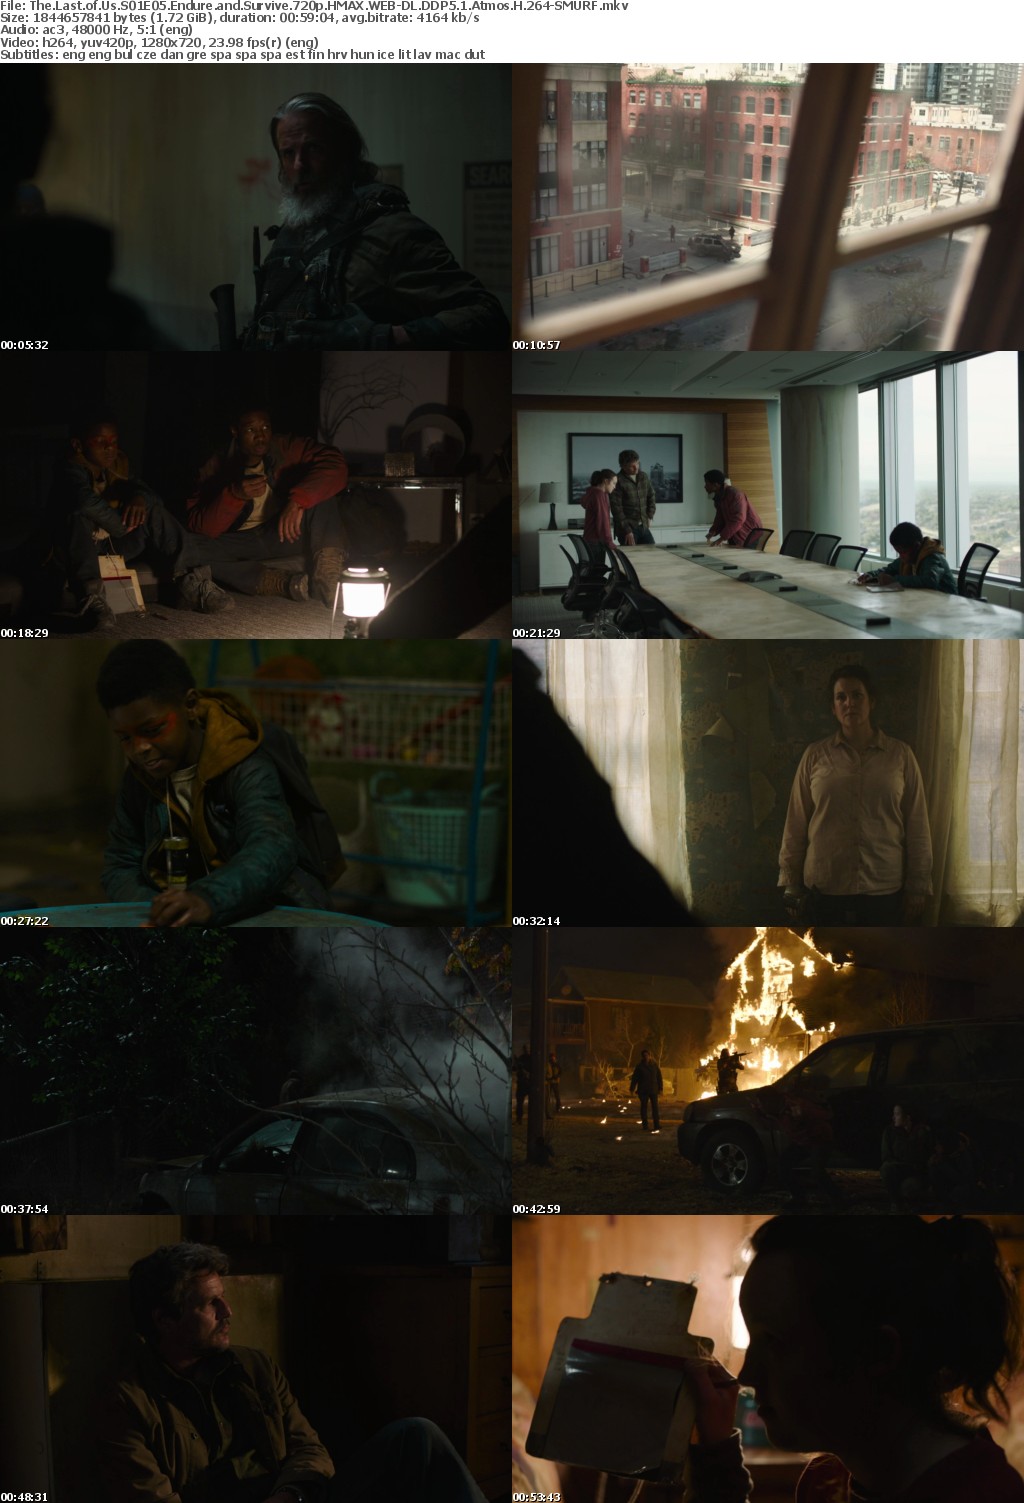 The Last of Us S01E05 720p HMAX WEBRip DDP5 1 Atmos x264-SMURF